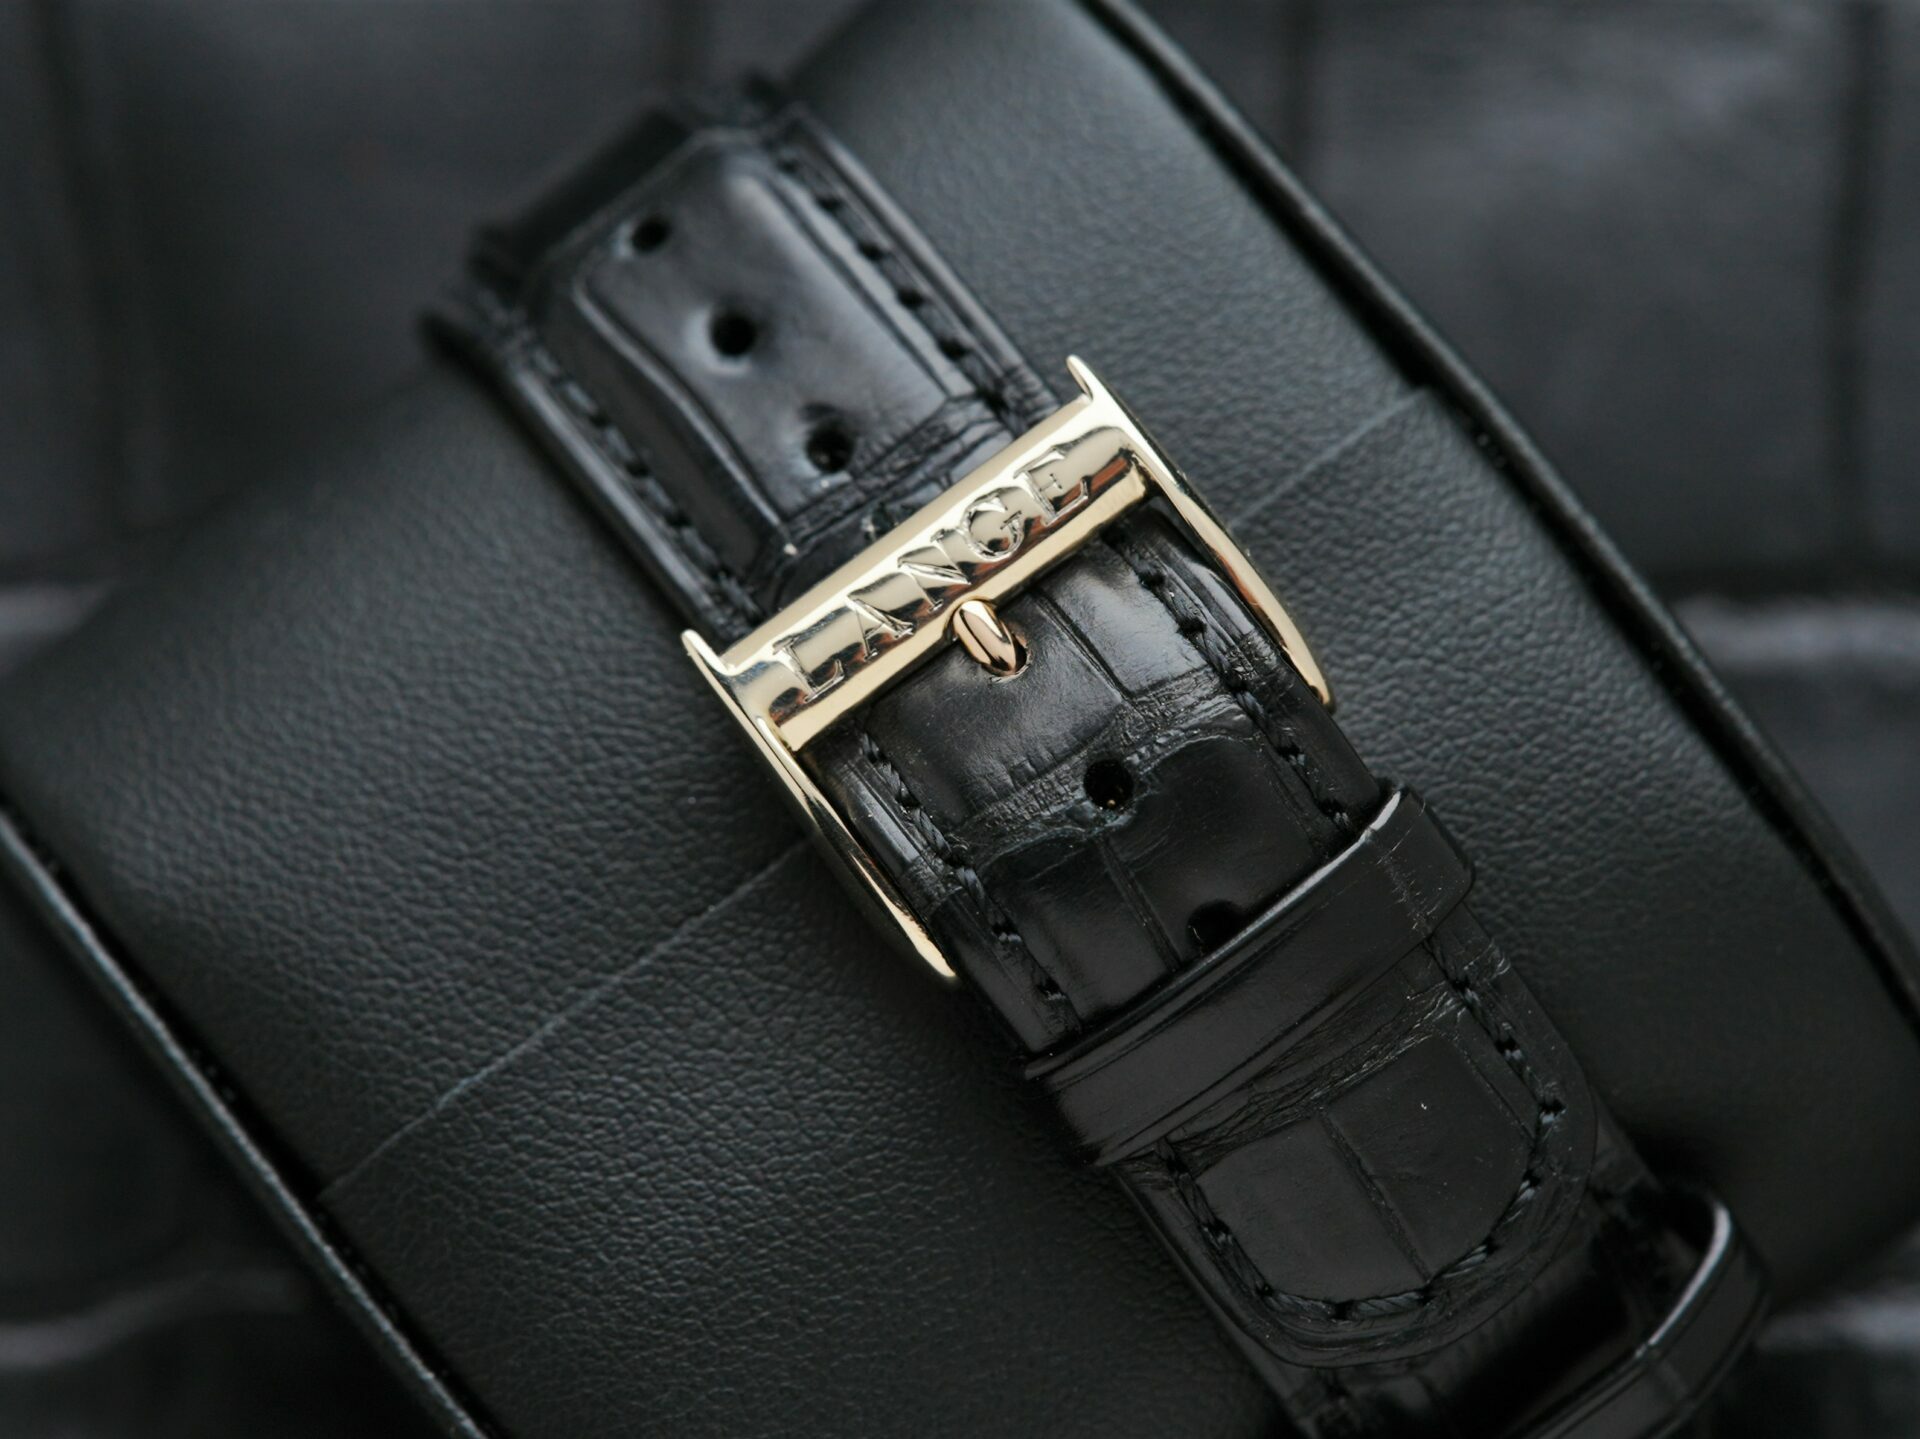 Strap and buckle on the A. Lange & Söhne Richard Lange Platinum watch.